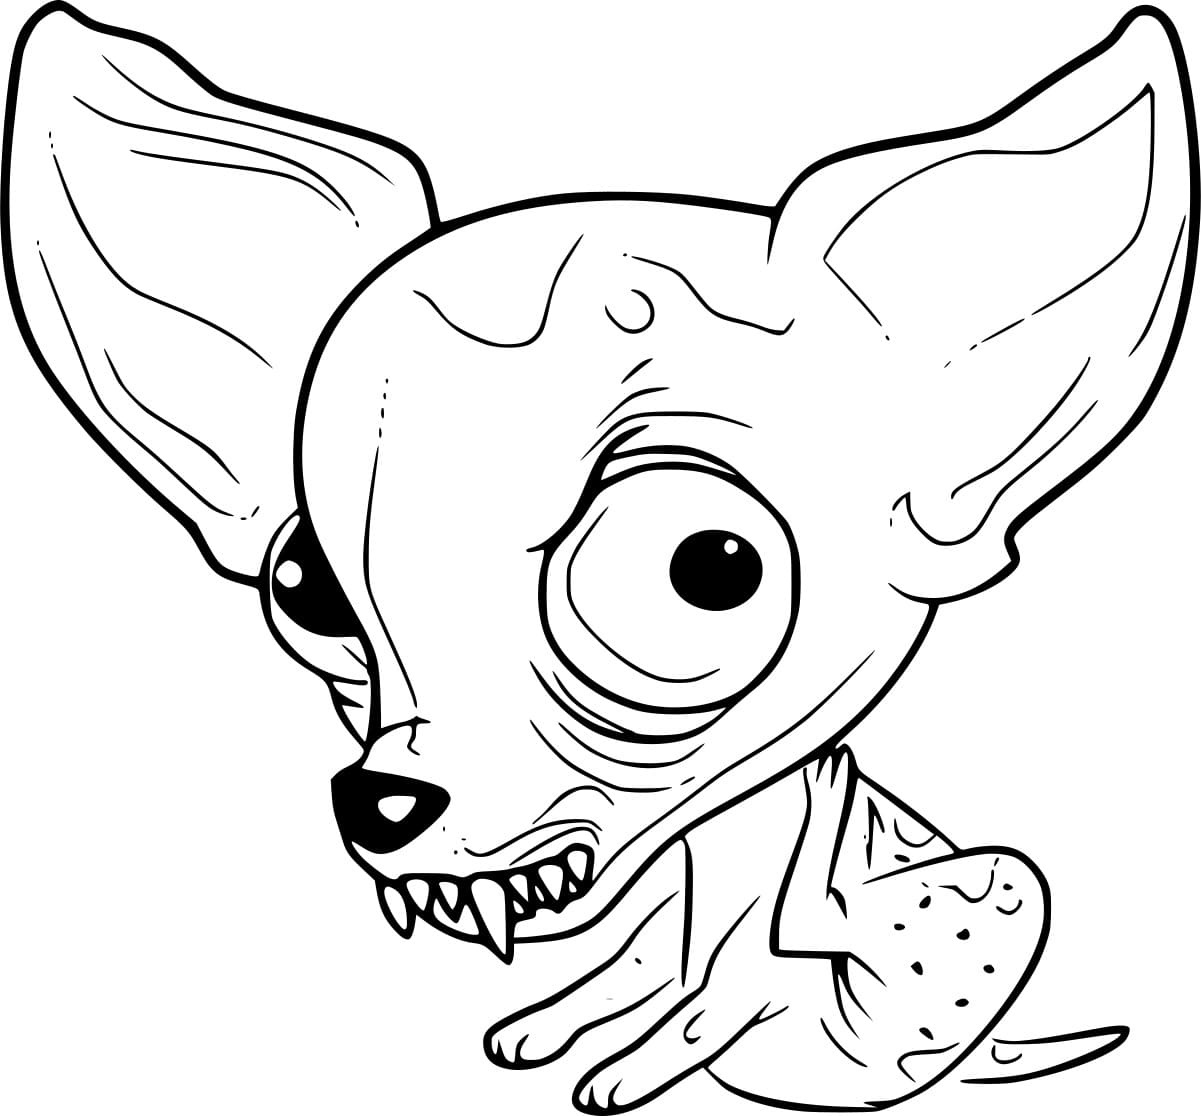 Fierce Chihuahua Coloring Page